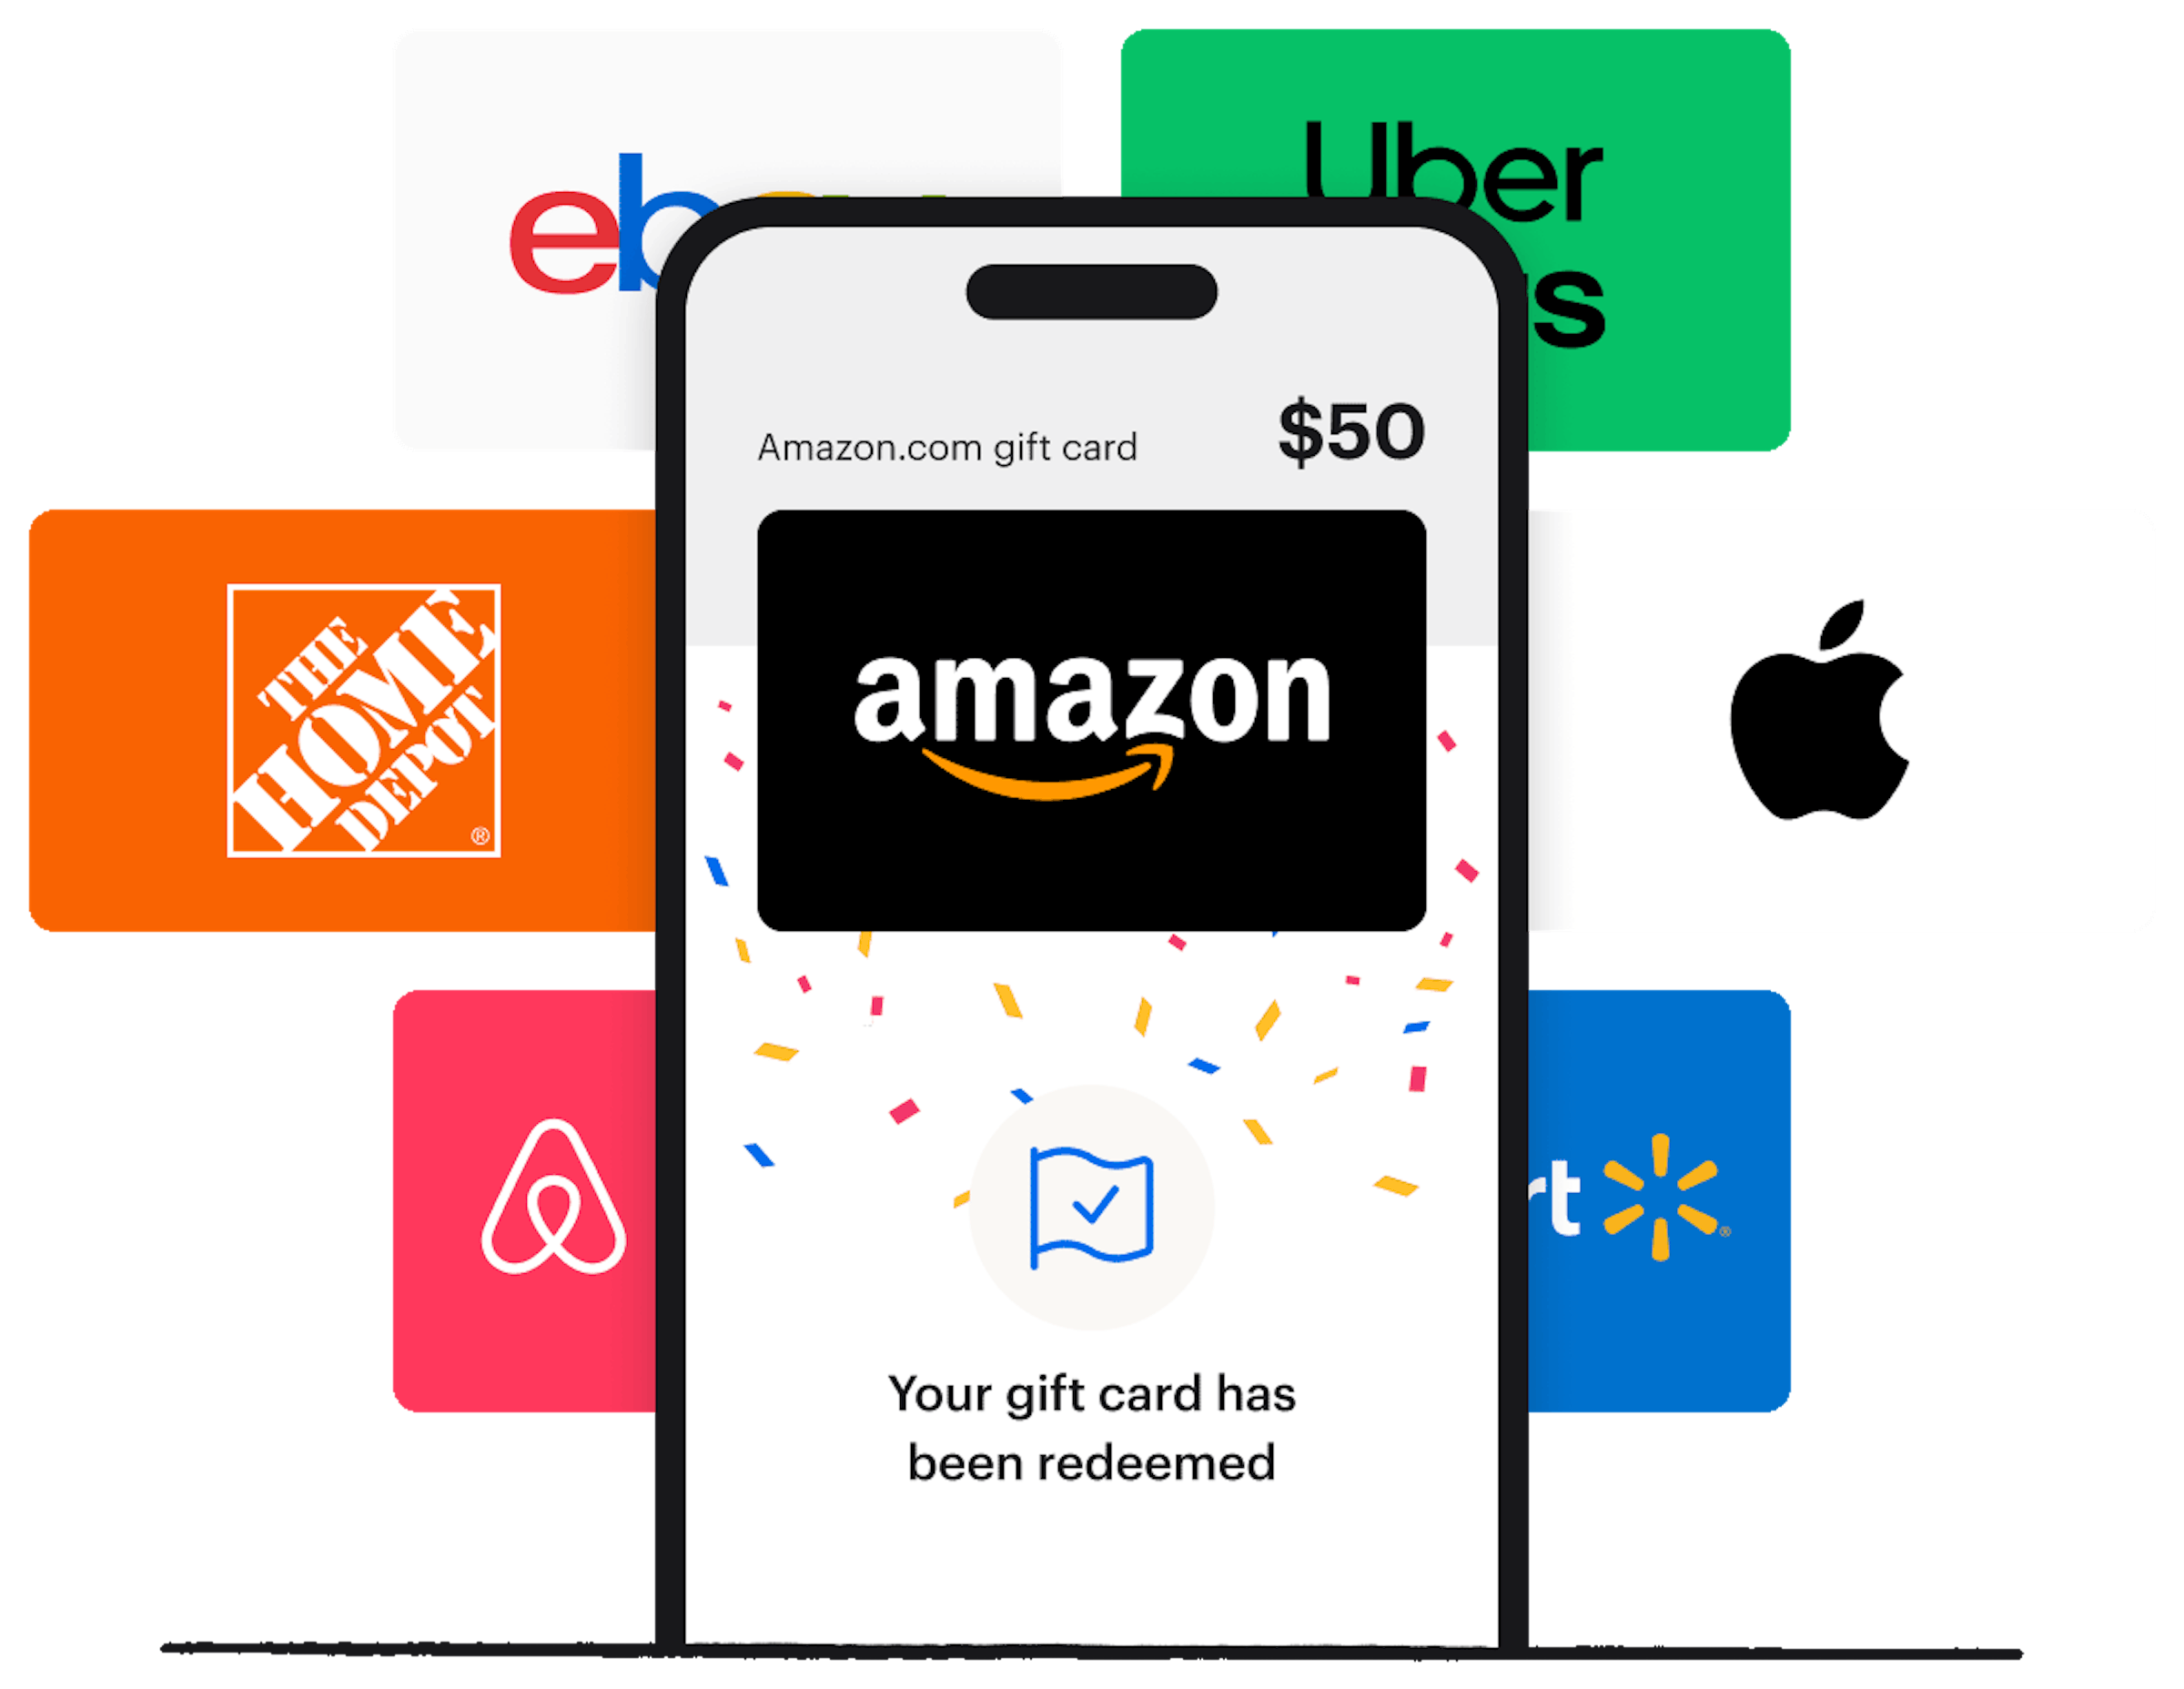 https://www.datocms-assets.com/85985/1704404516-gift-cards-hero-mobile.png?auto=format?auto=format&fit=max&dpr=2&q=50